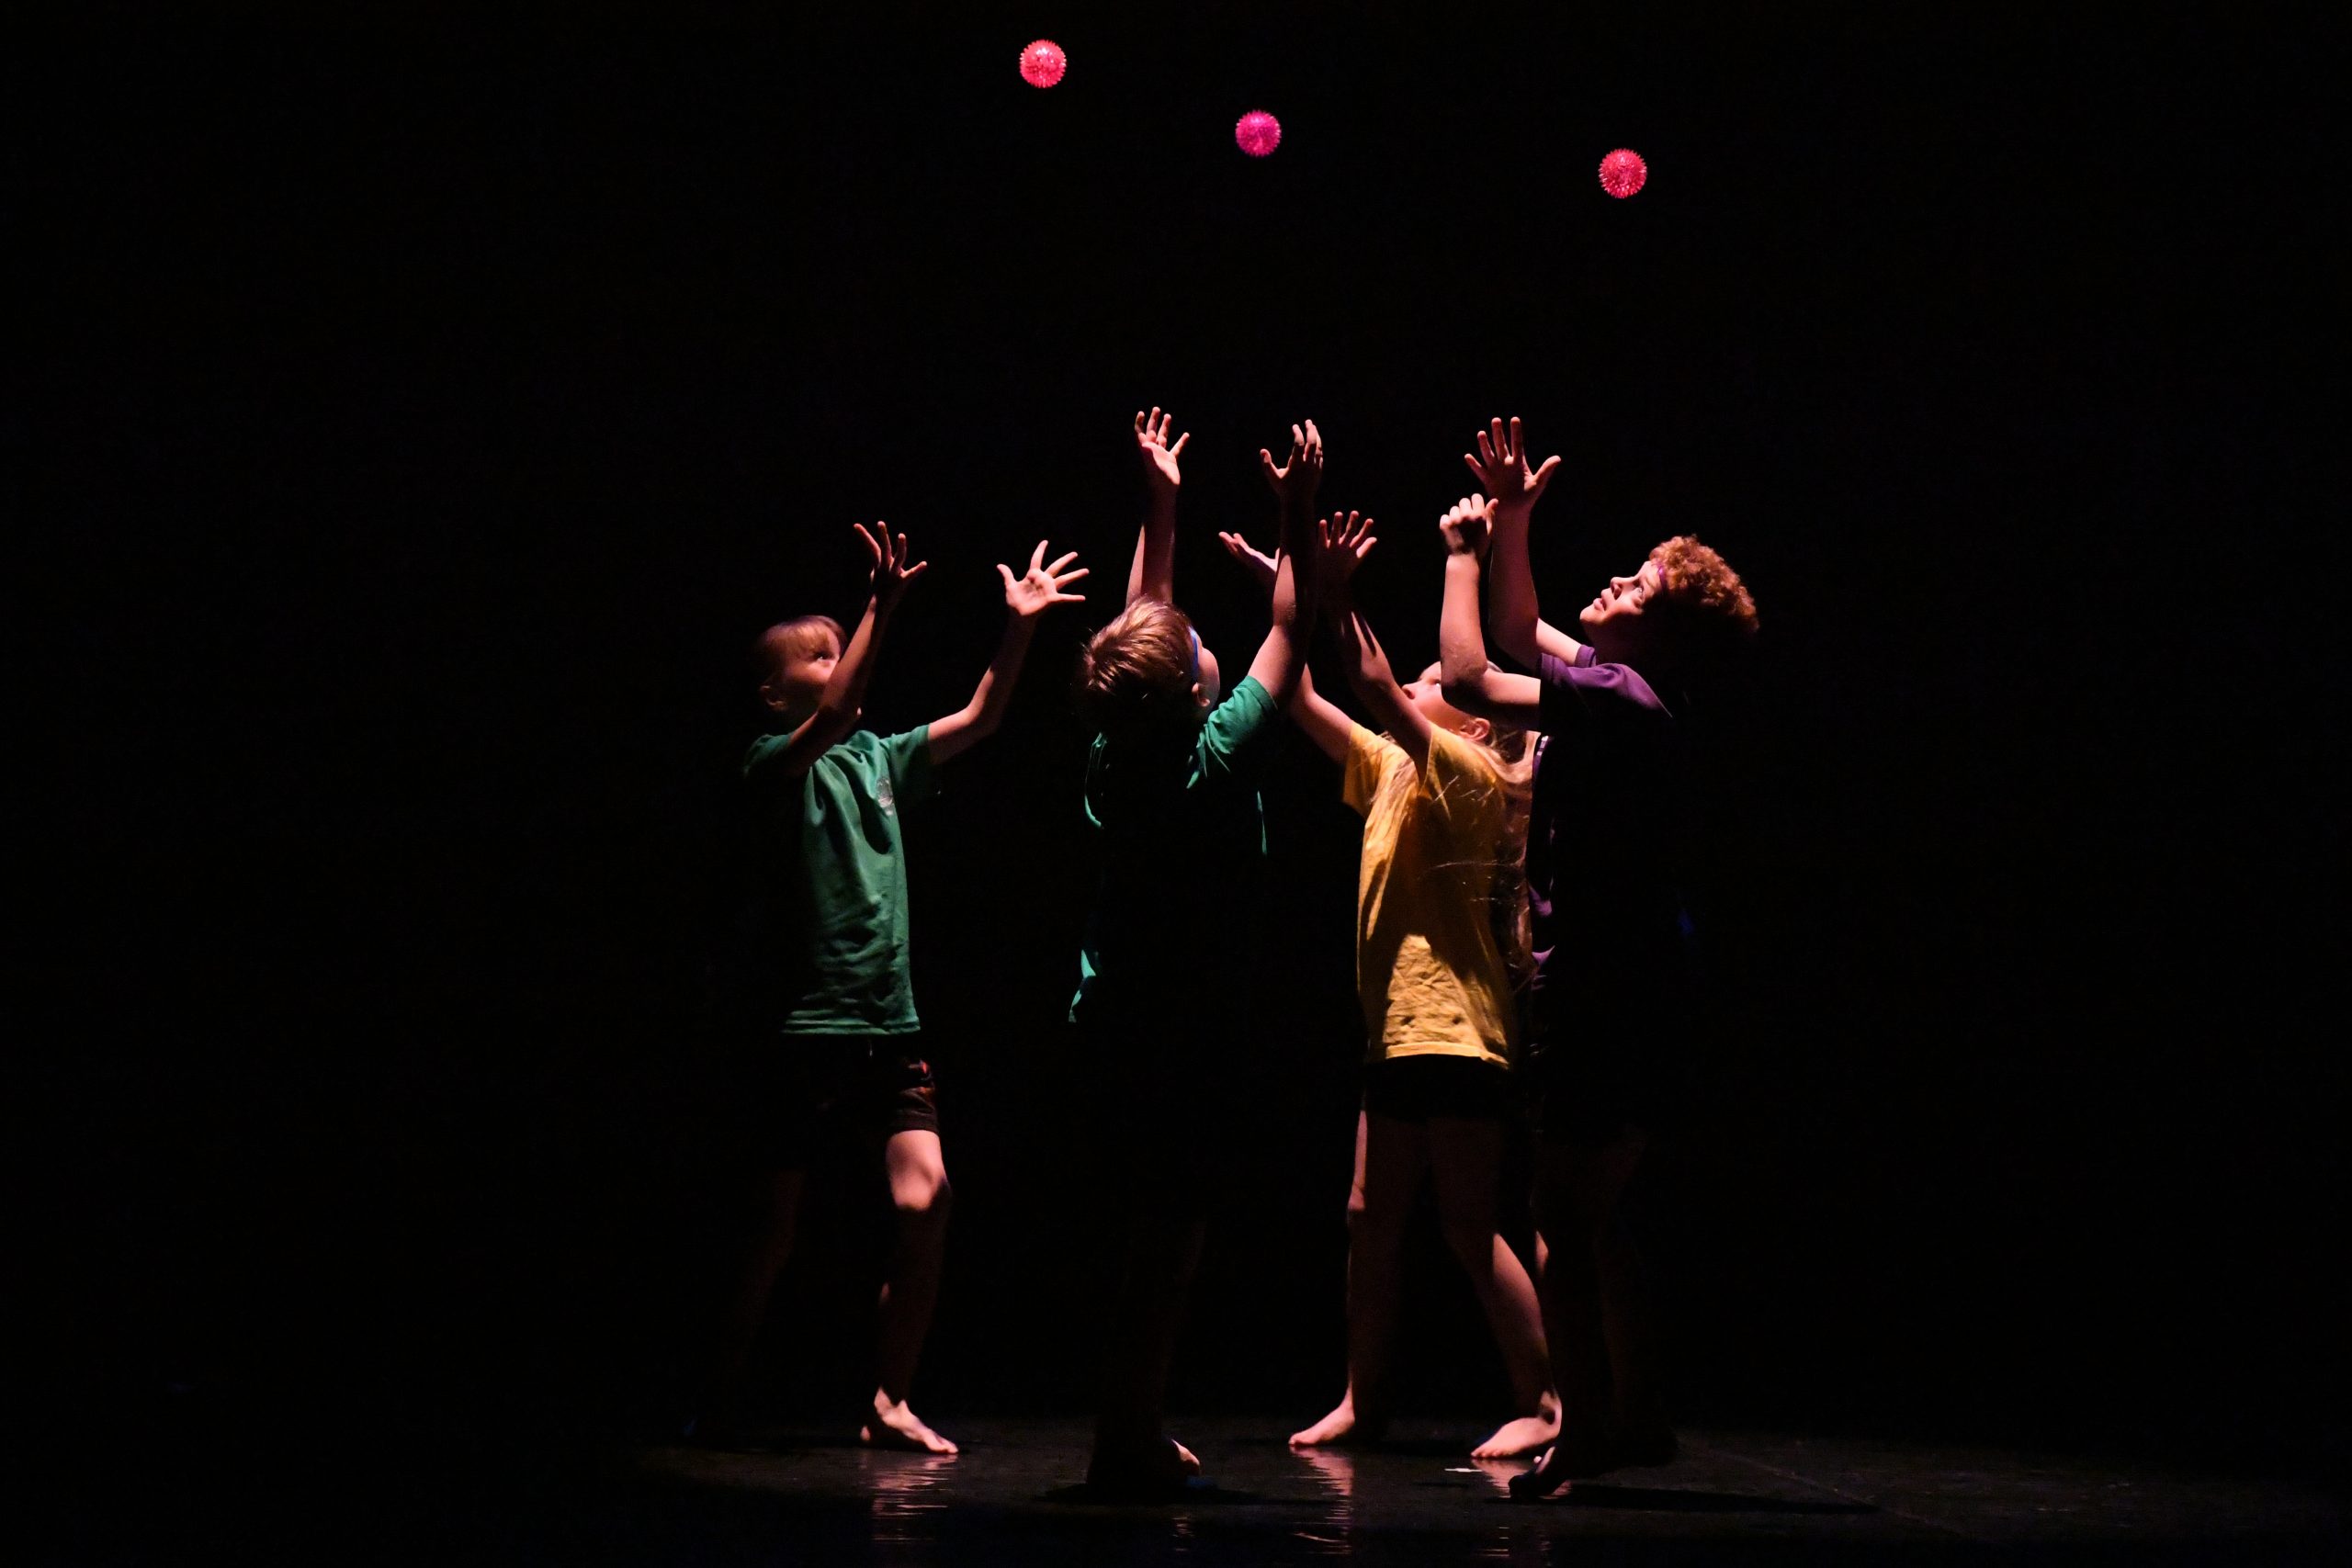 Group of children standing on stage throwing red balls in the air